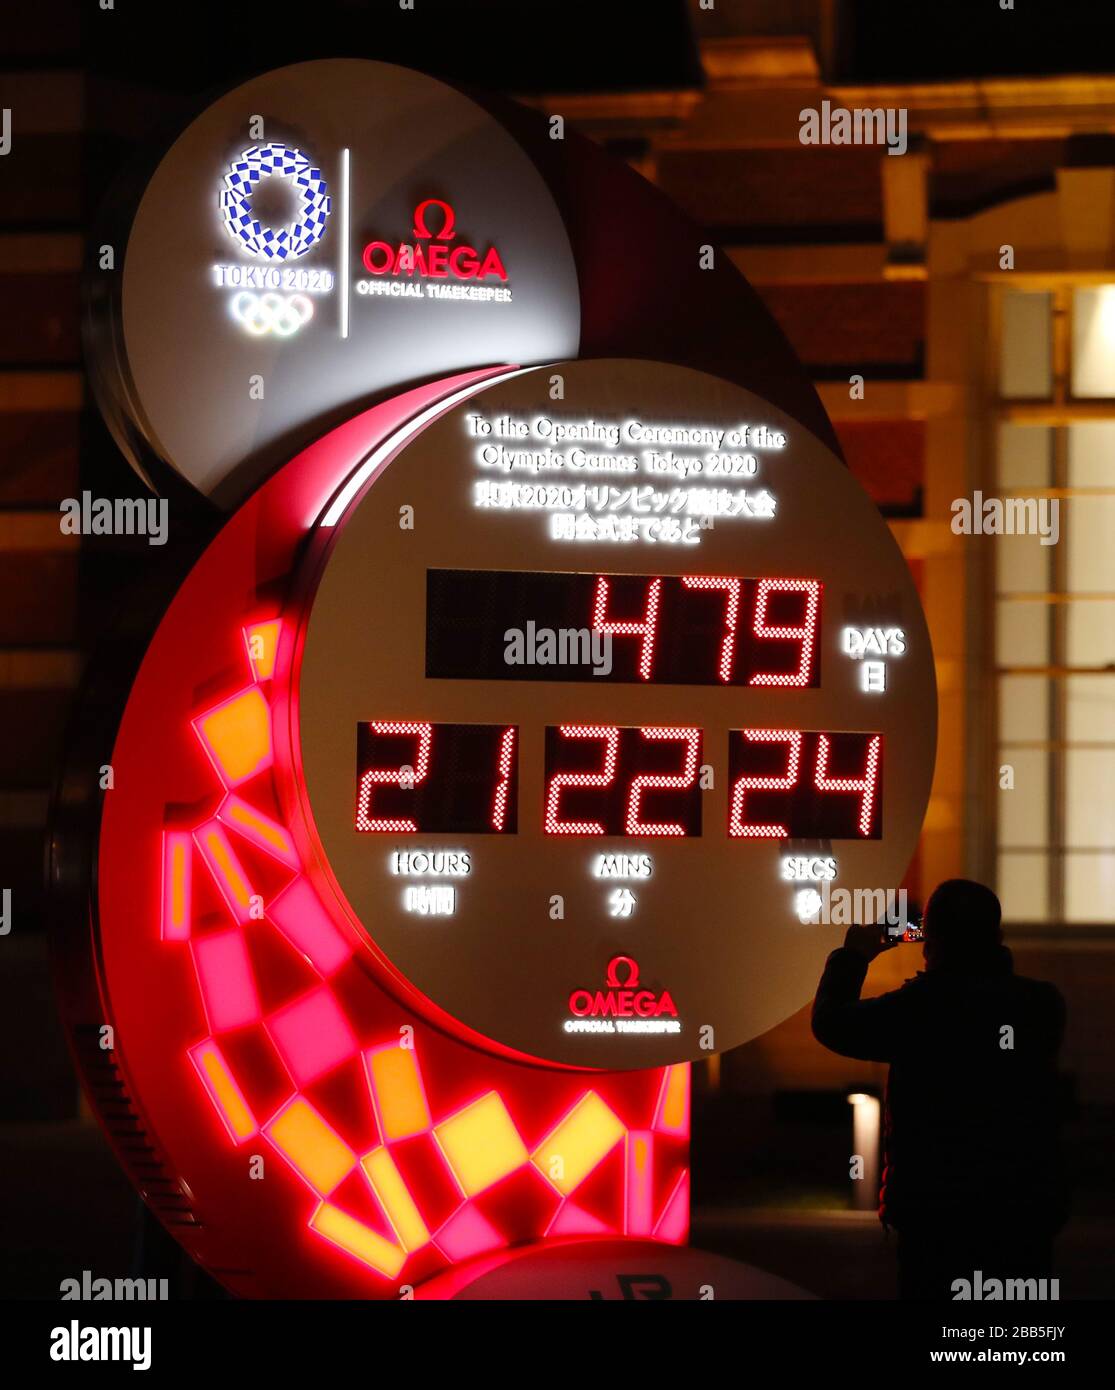 Tokyo 8th Aug 21 A Countdown Clock Shows The Adjusted Time Remaining For The Postponed Tokyo Olympic Games Outside Tokyo Station In Tokyo On March 30 The Tokyo Olympic Games Has